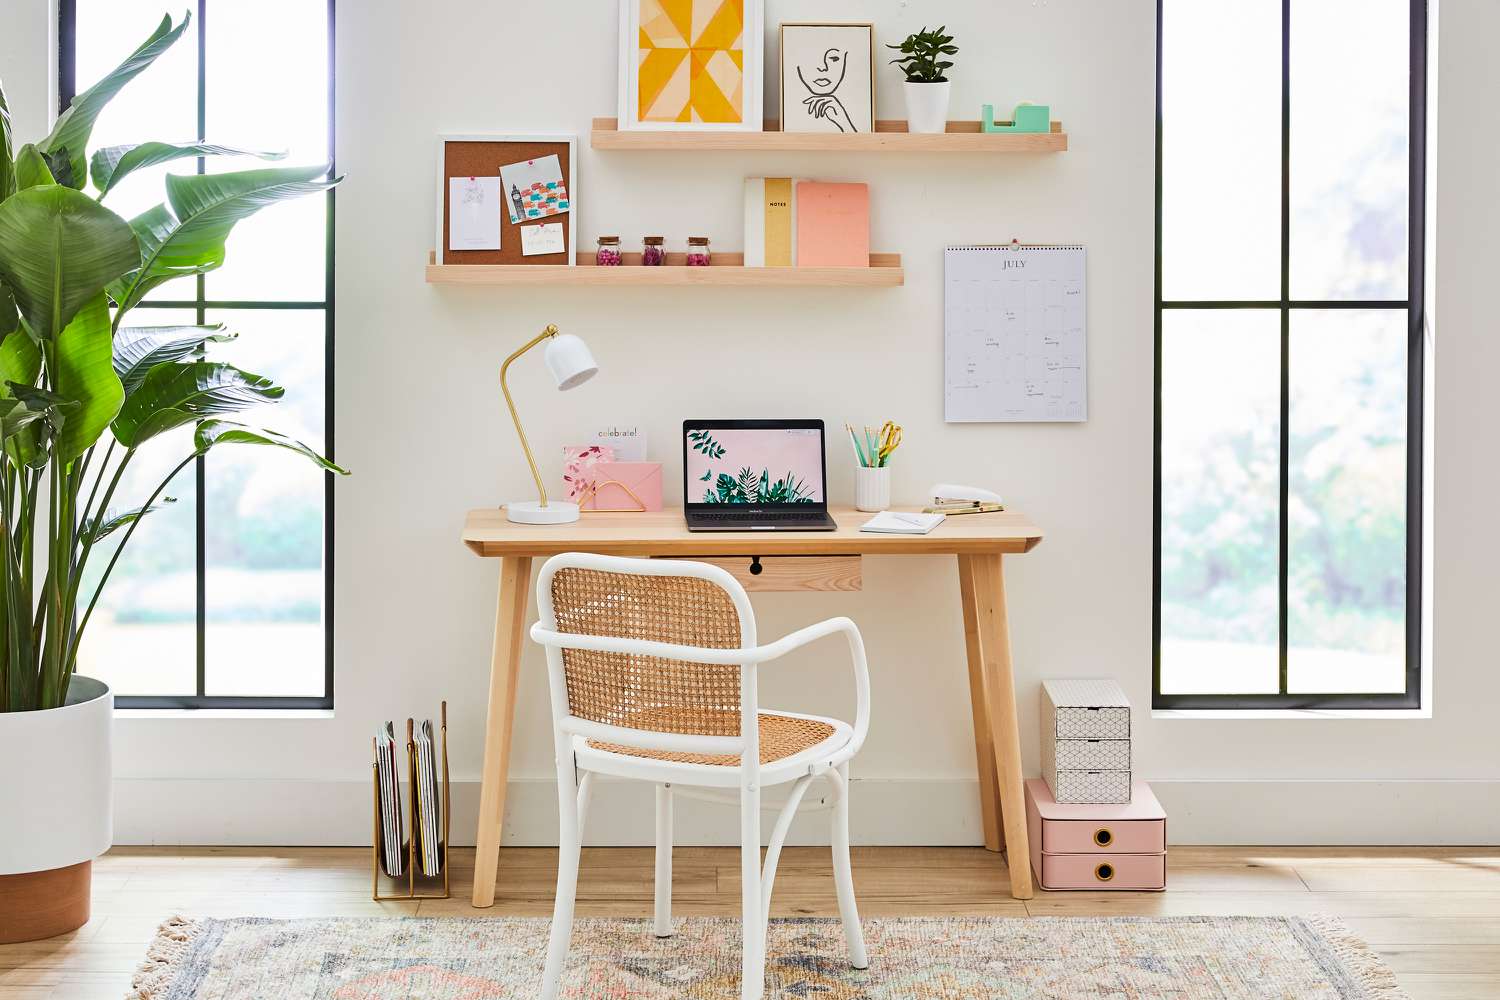 Home office area with colorful decorative items on shelves